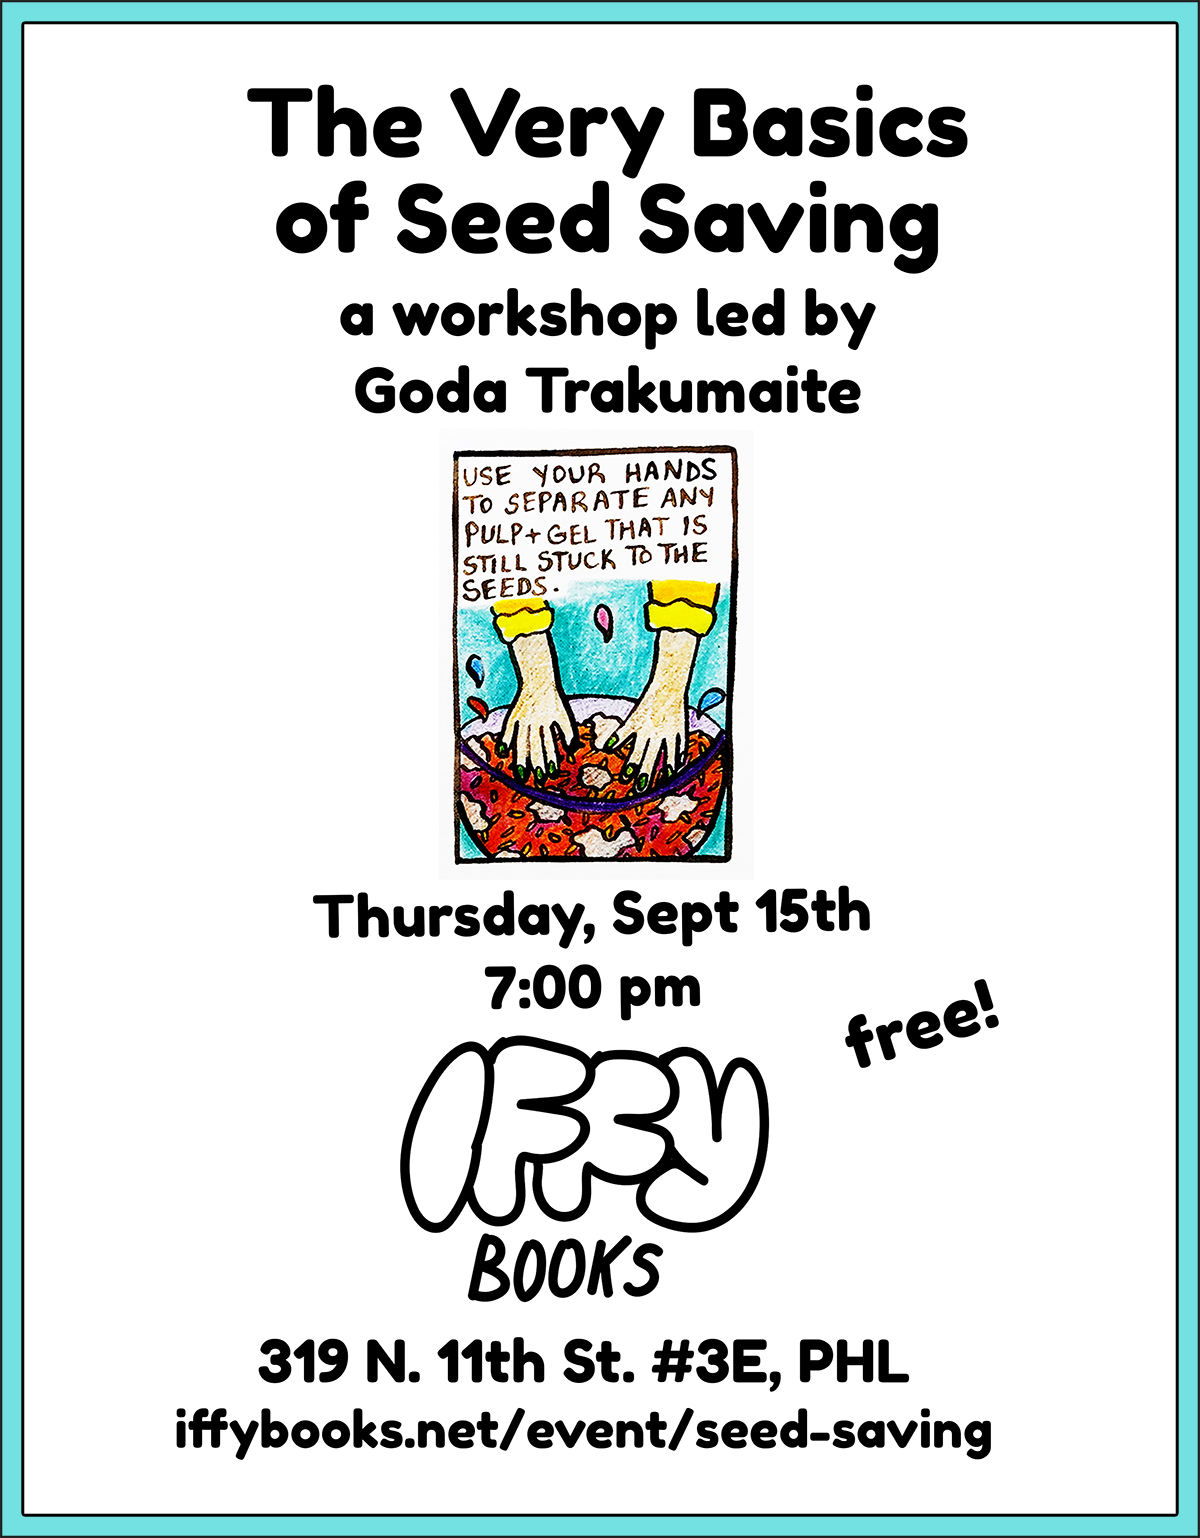 Flyer with an illustration of two hands in a bowl of tomato pulp with the caption "Use your hands to separate any pulp+gel that is still stuck to the seeds." The main flyer text reads as follows: The Very Basics of Seed Saving: a workshop led by Goda Trakumaite / Thursday, September 15th / 7:00 pm / free! / Iffy Books / 319 N. 11th St. #3E, PHL / iffybooks.net/event/seed-saving